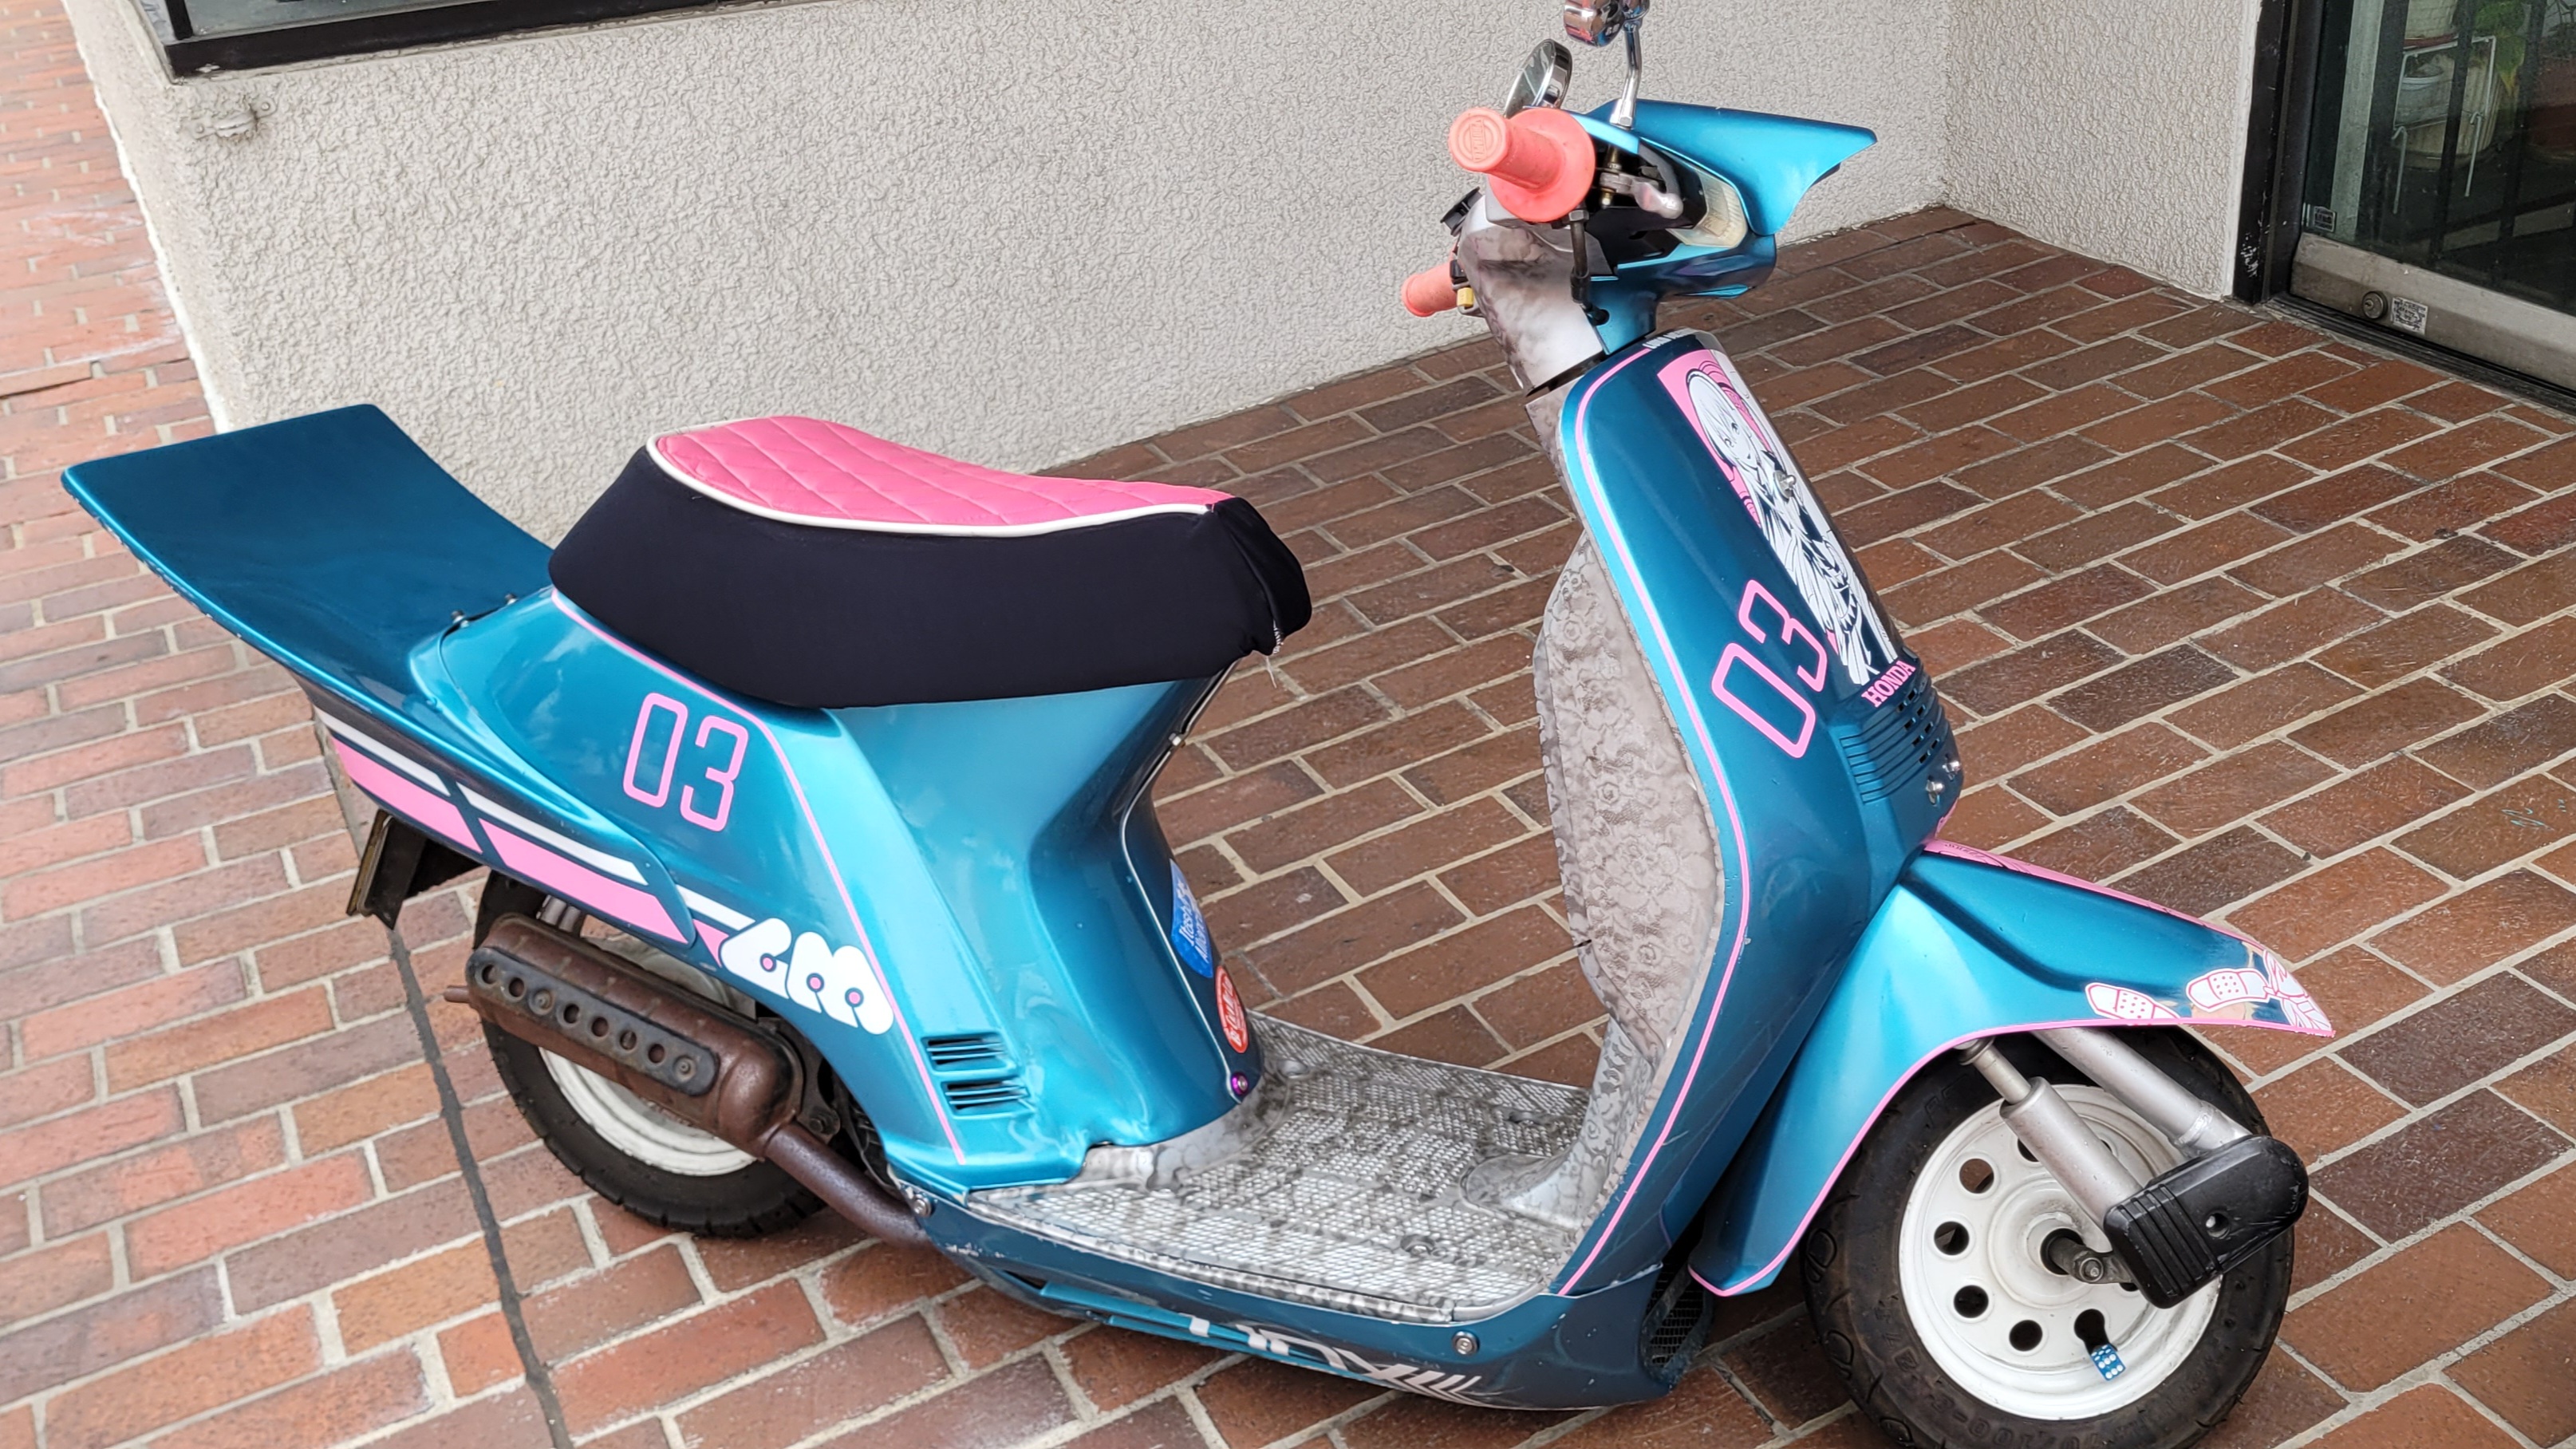 a photo of the luka itasha bike. the bike is primarily blue, with various pink and white decals on the bike featuring luka.